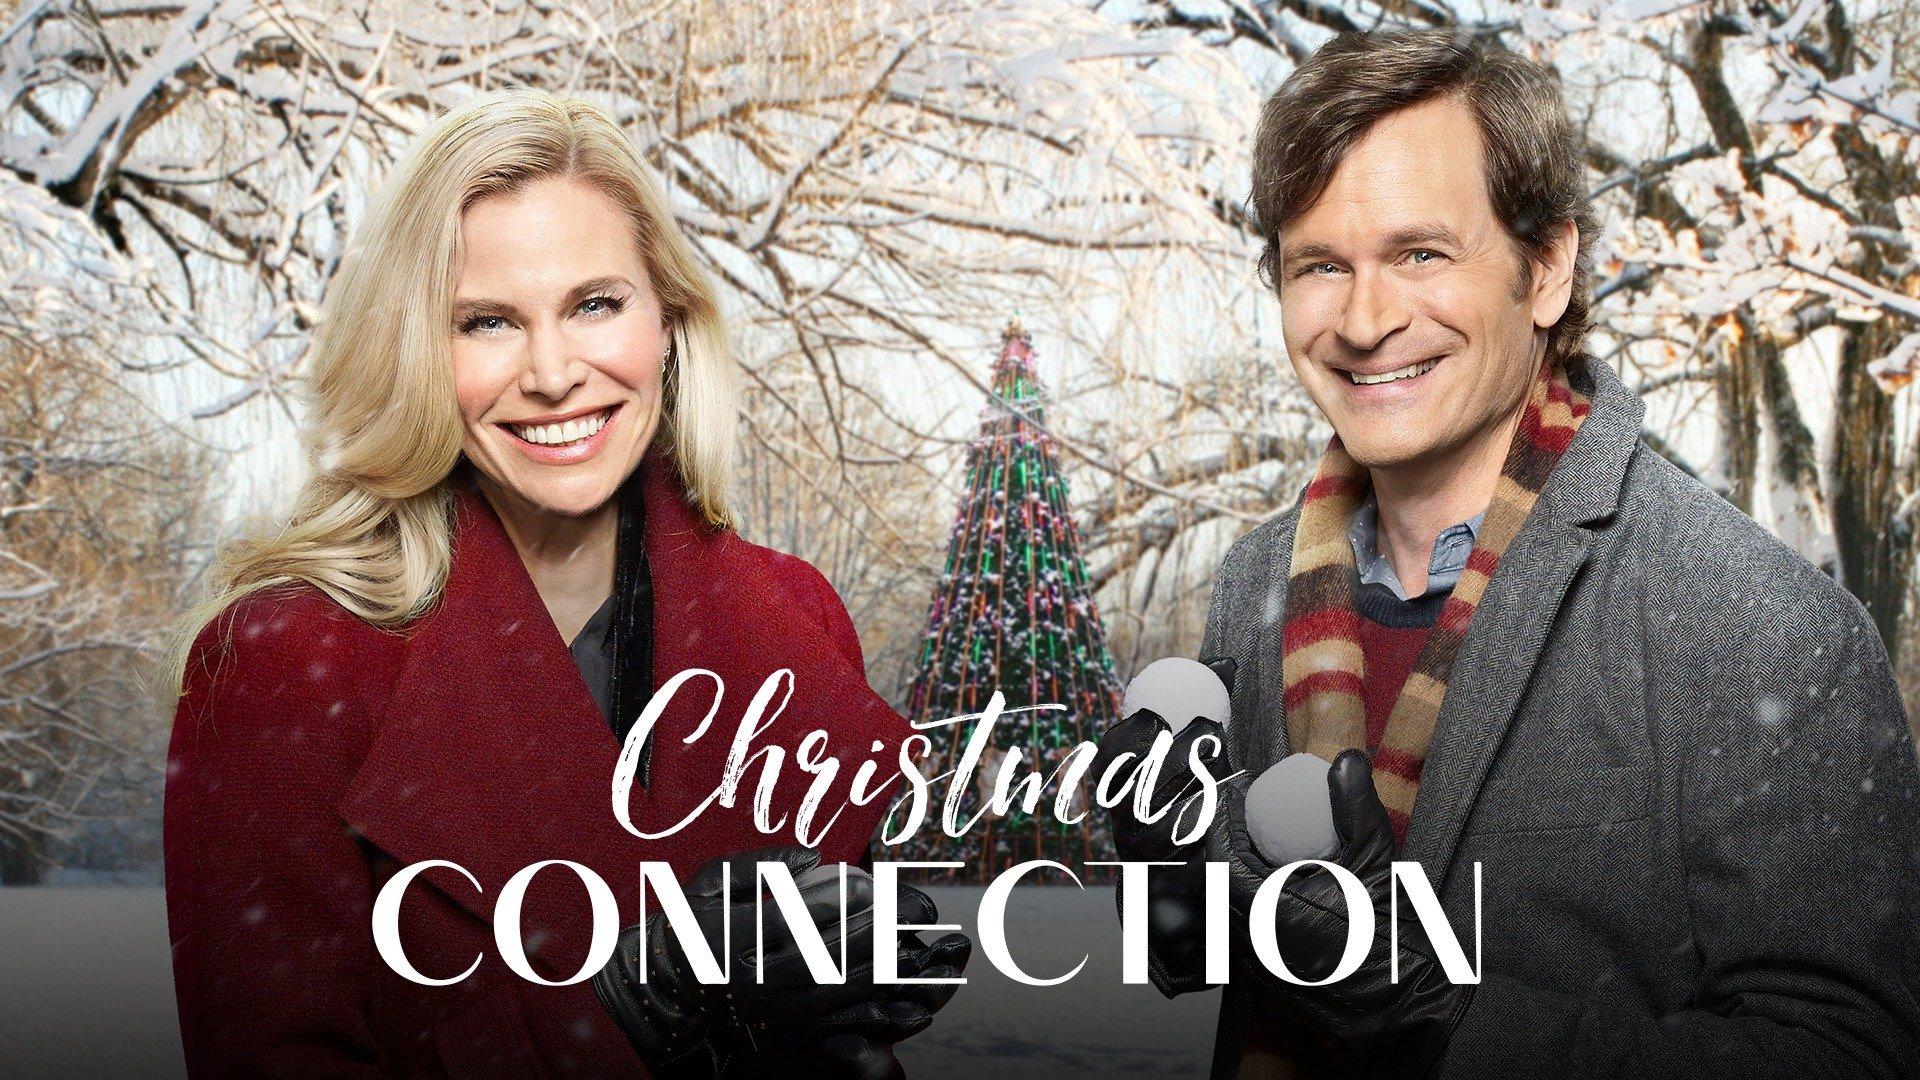 Watch Christmas Connection Streaming Online on Philo (Free Trial)